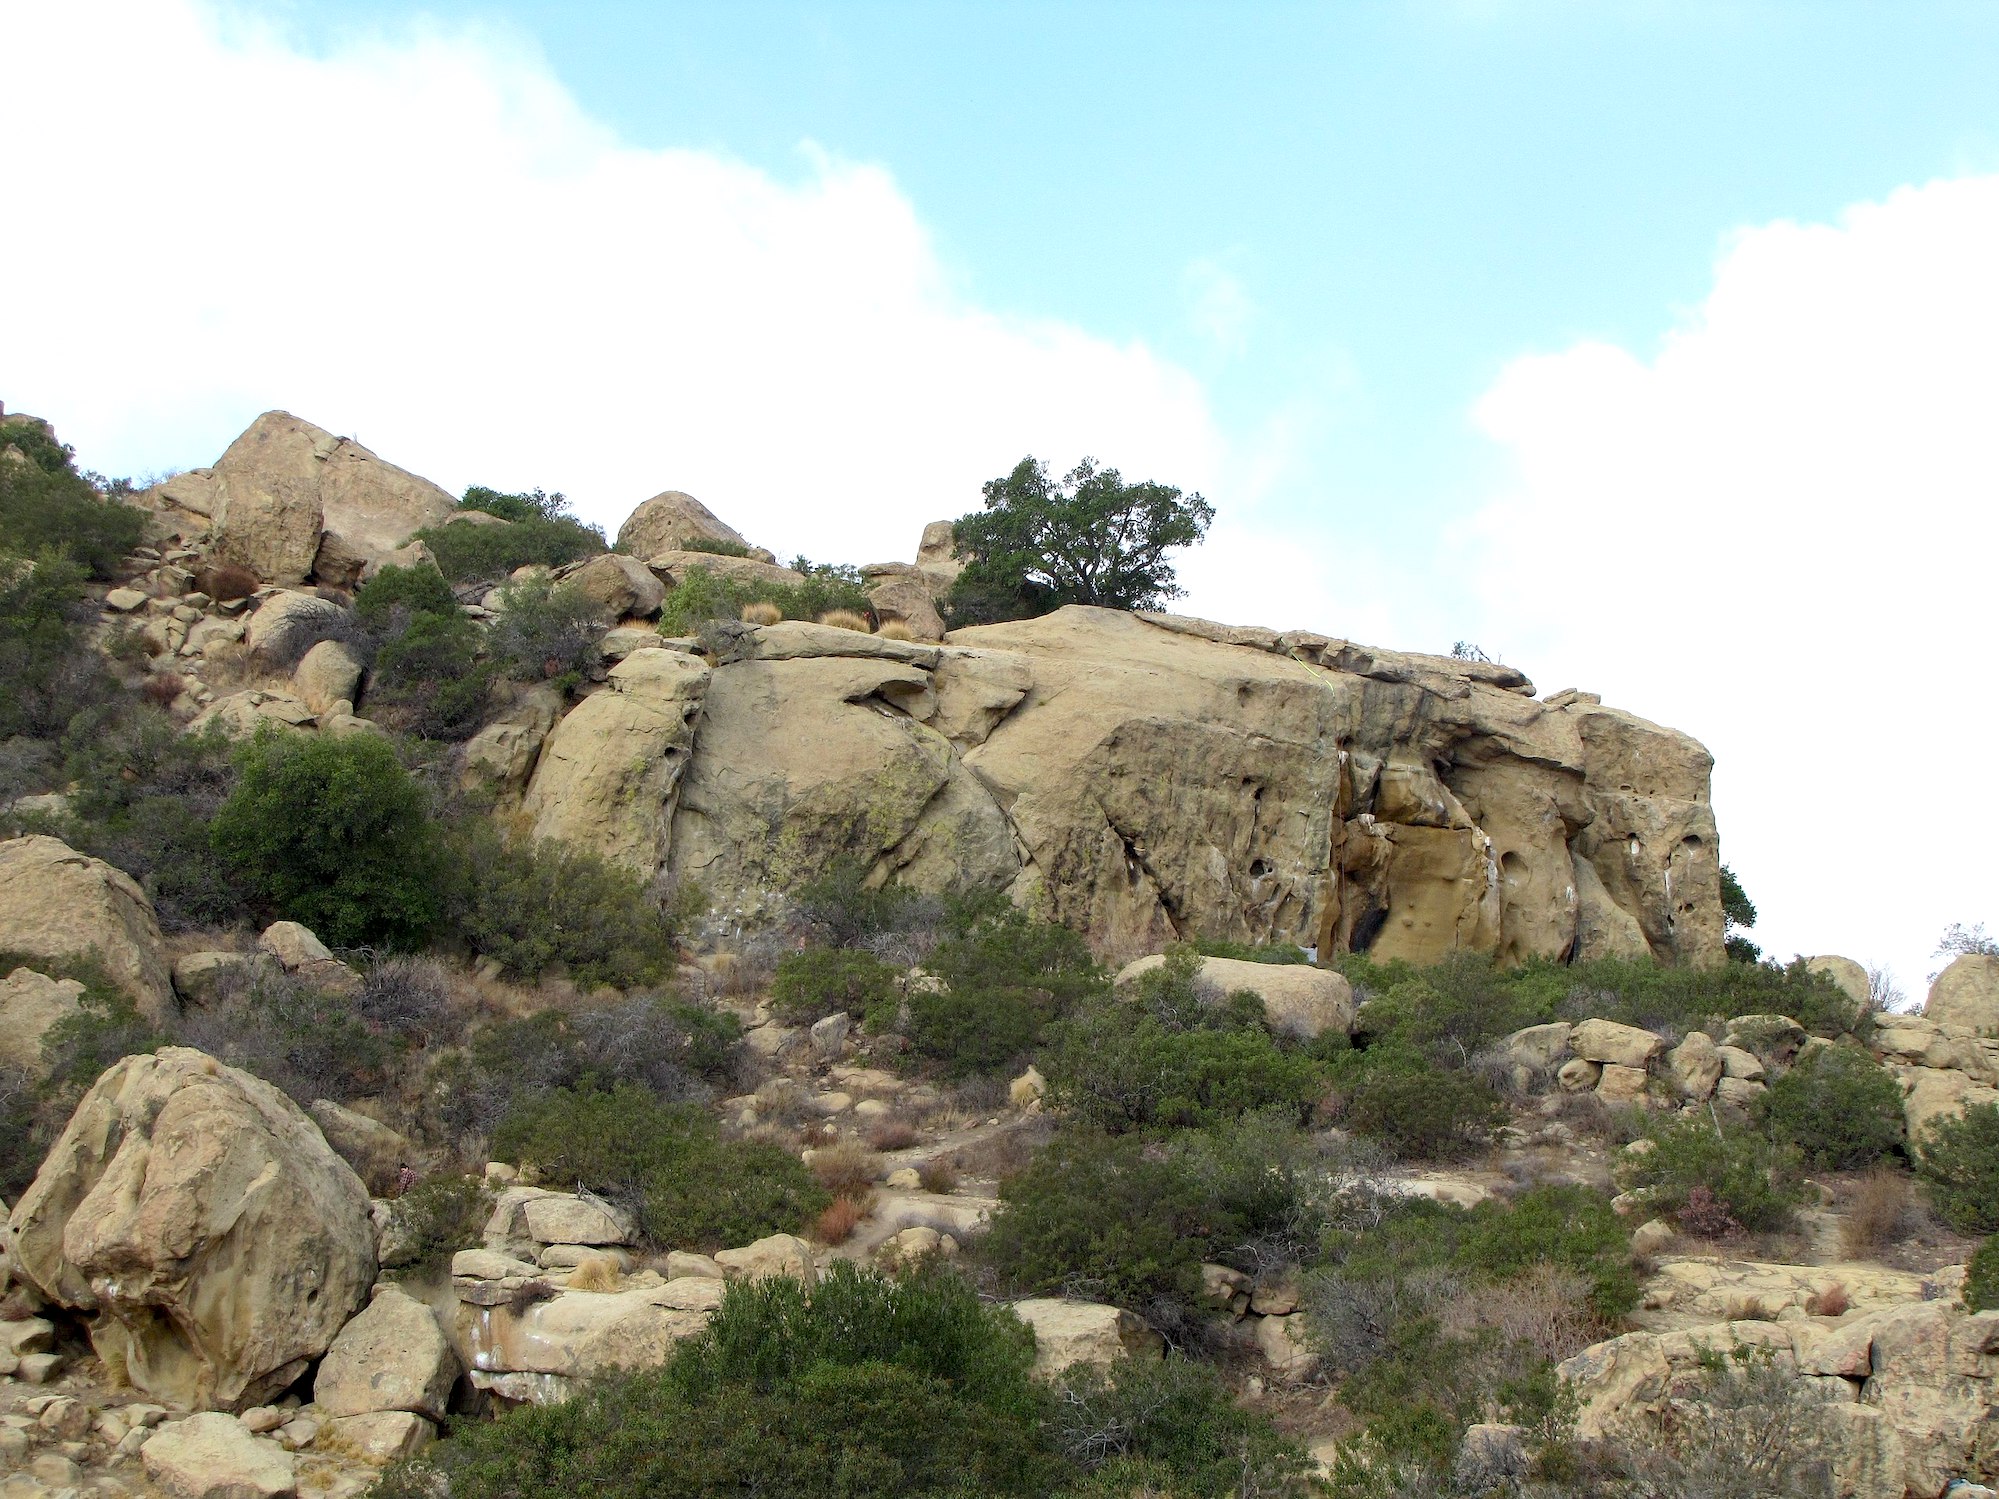 Boulders and rock formations with scattered vegetation